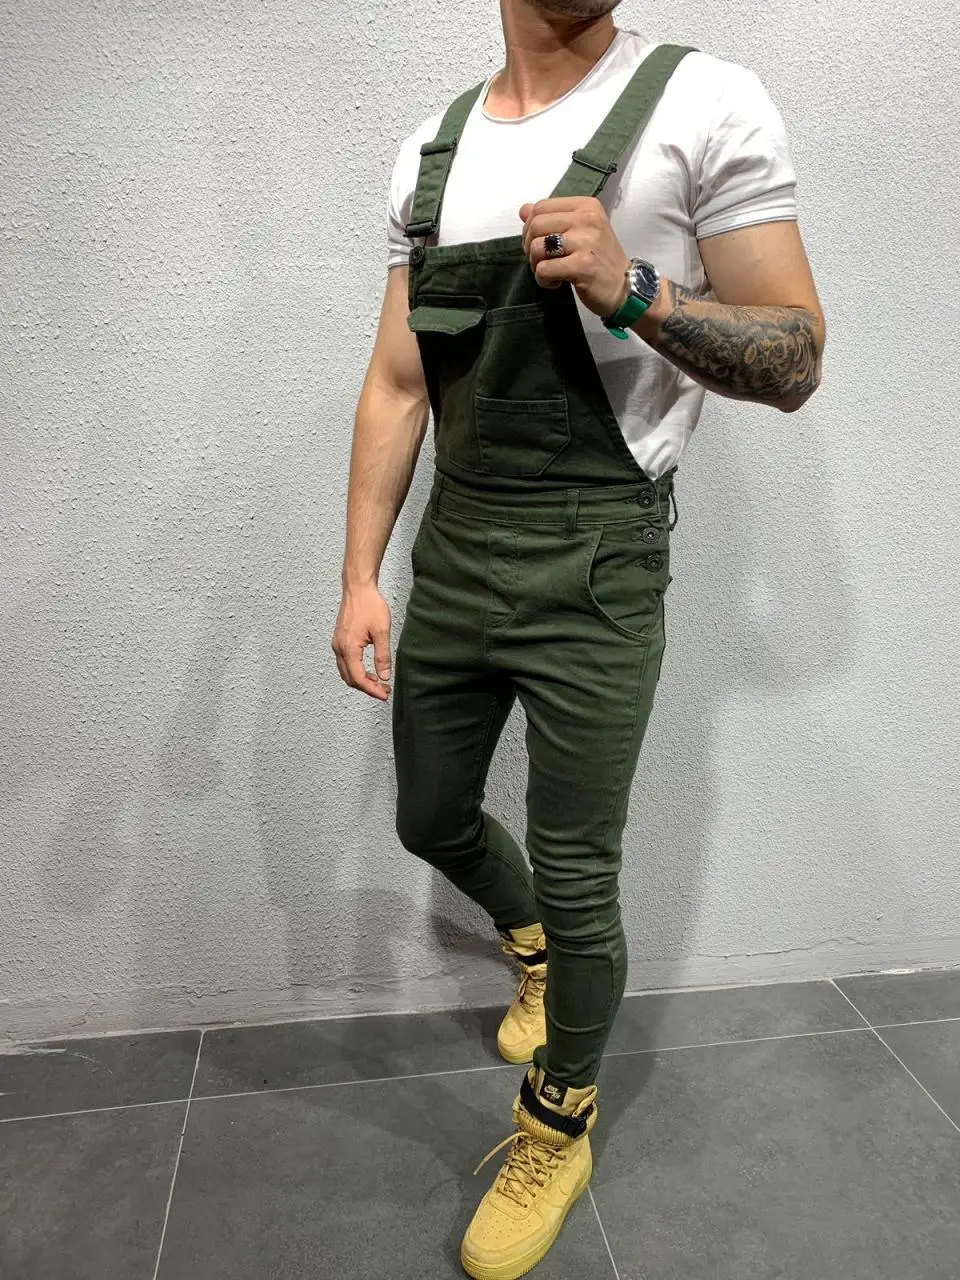 

2022 Newest Europe America Style Mens Denim Pants Dungarees Bib Overalls Jumpsuits Moto Biker Jeans Baggy Trousers Fashion